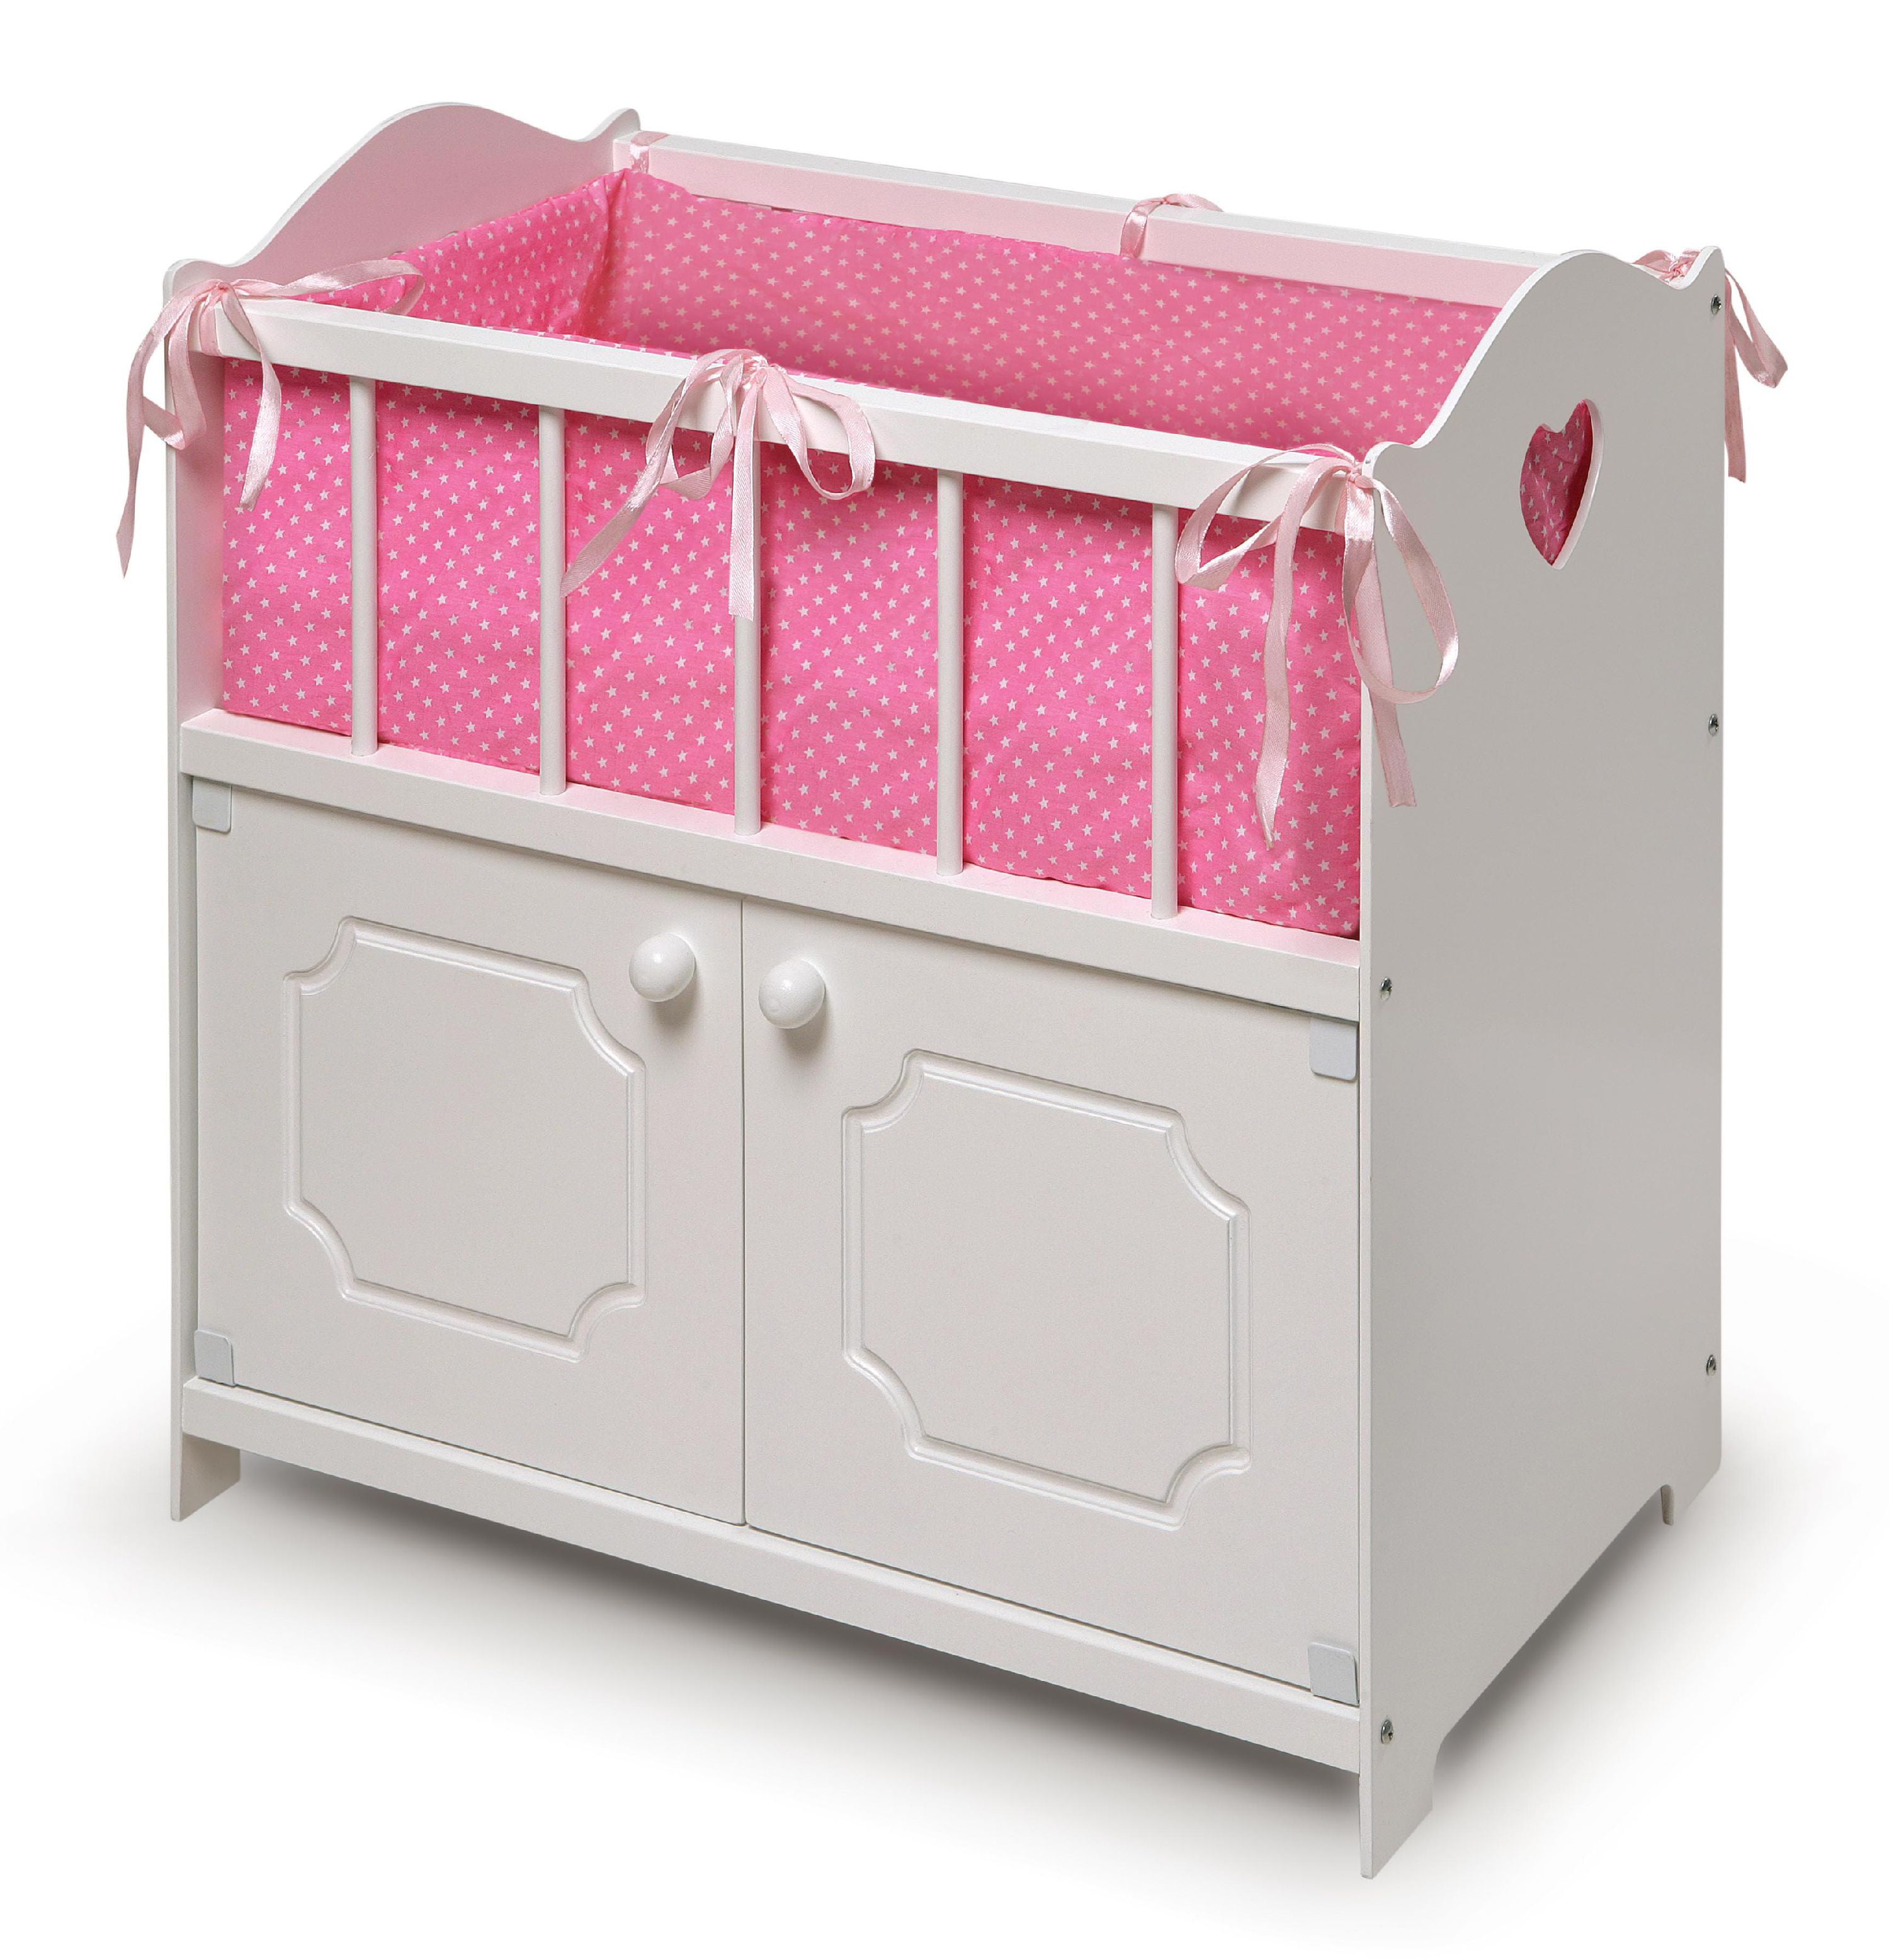 Badger Basket Doll Bunk Bed With, Badger Basket Doll Bunk Beds With Ladder And Storage Armoire